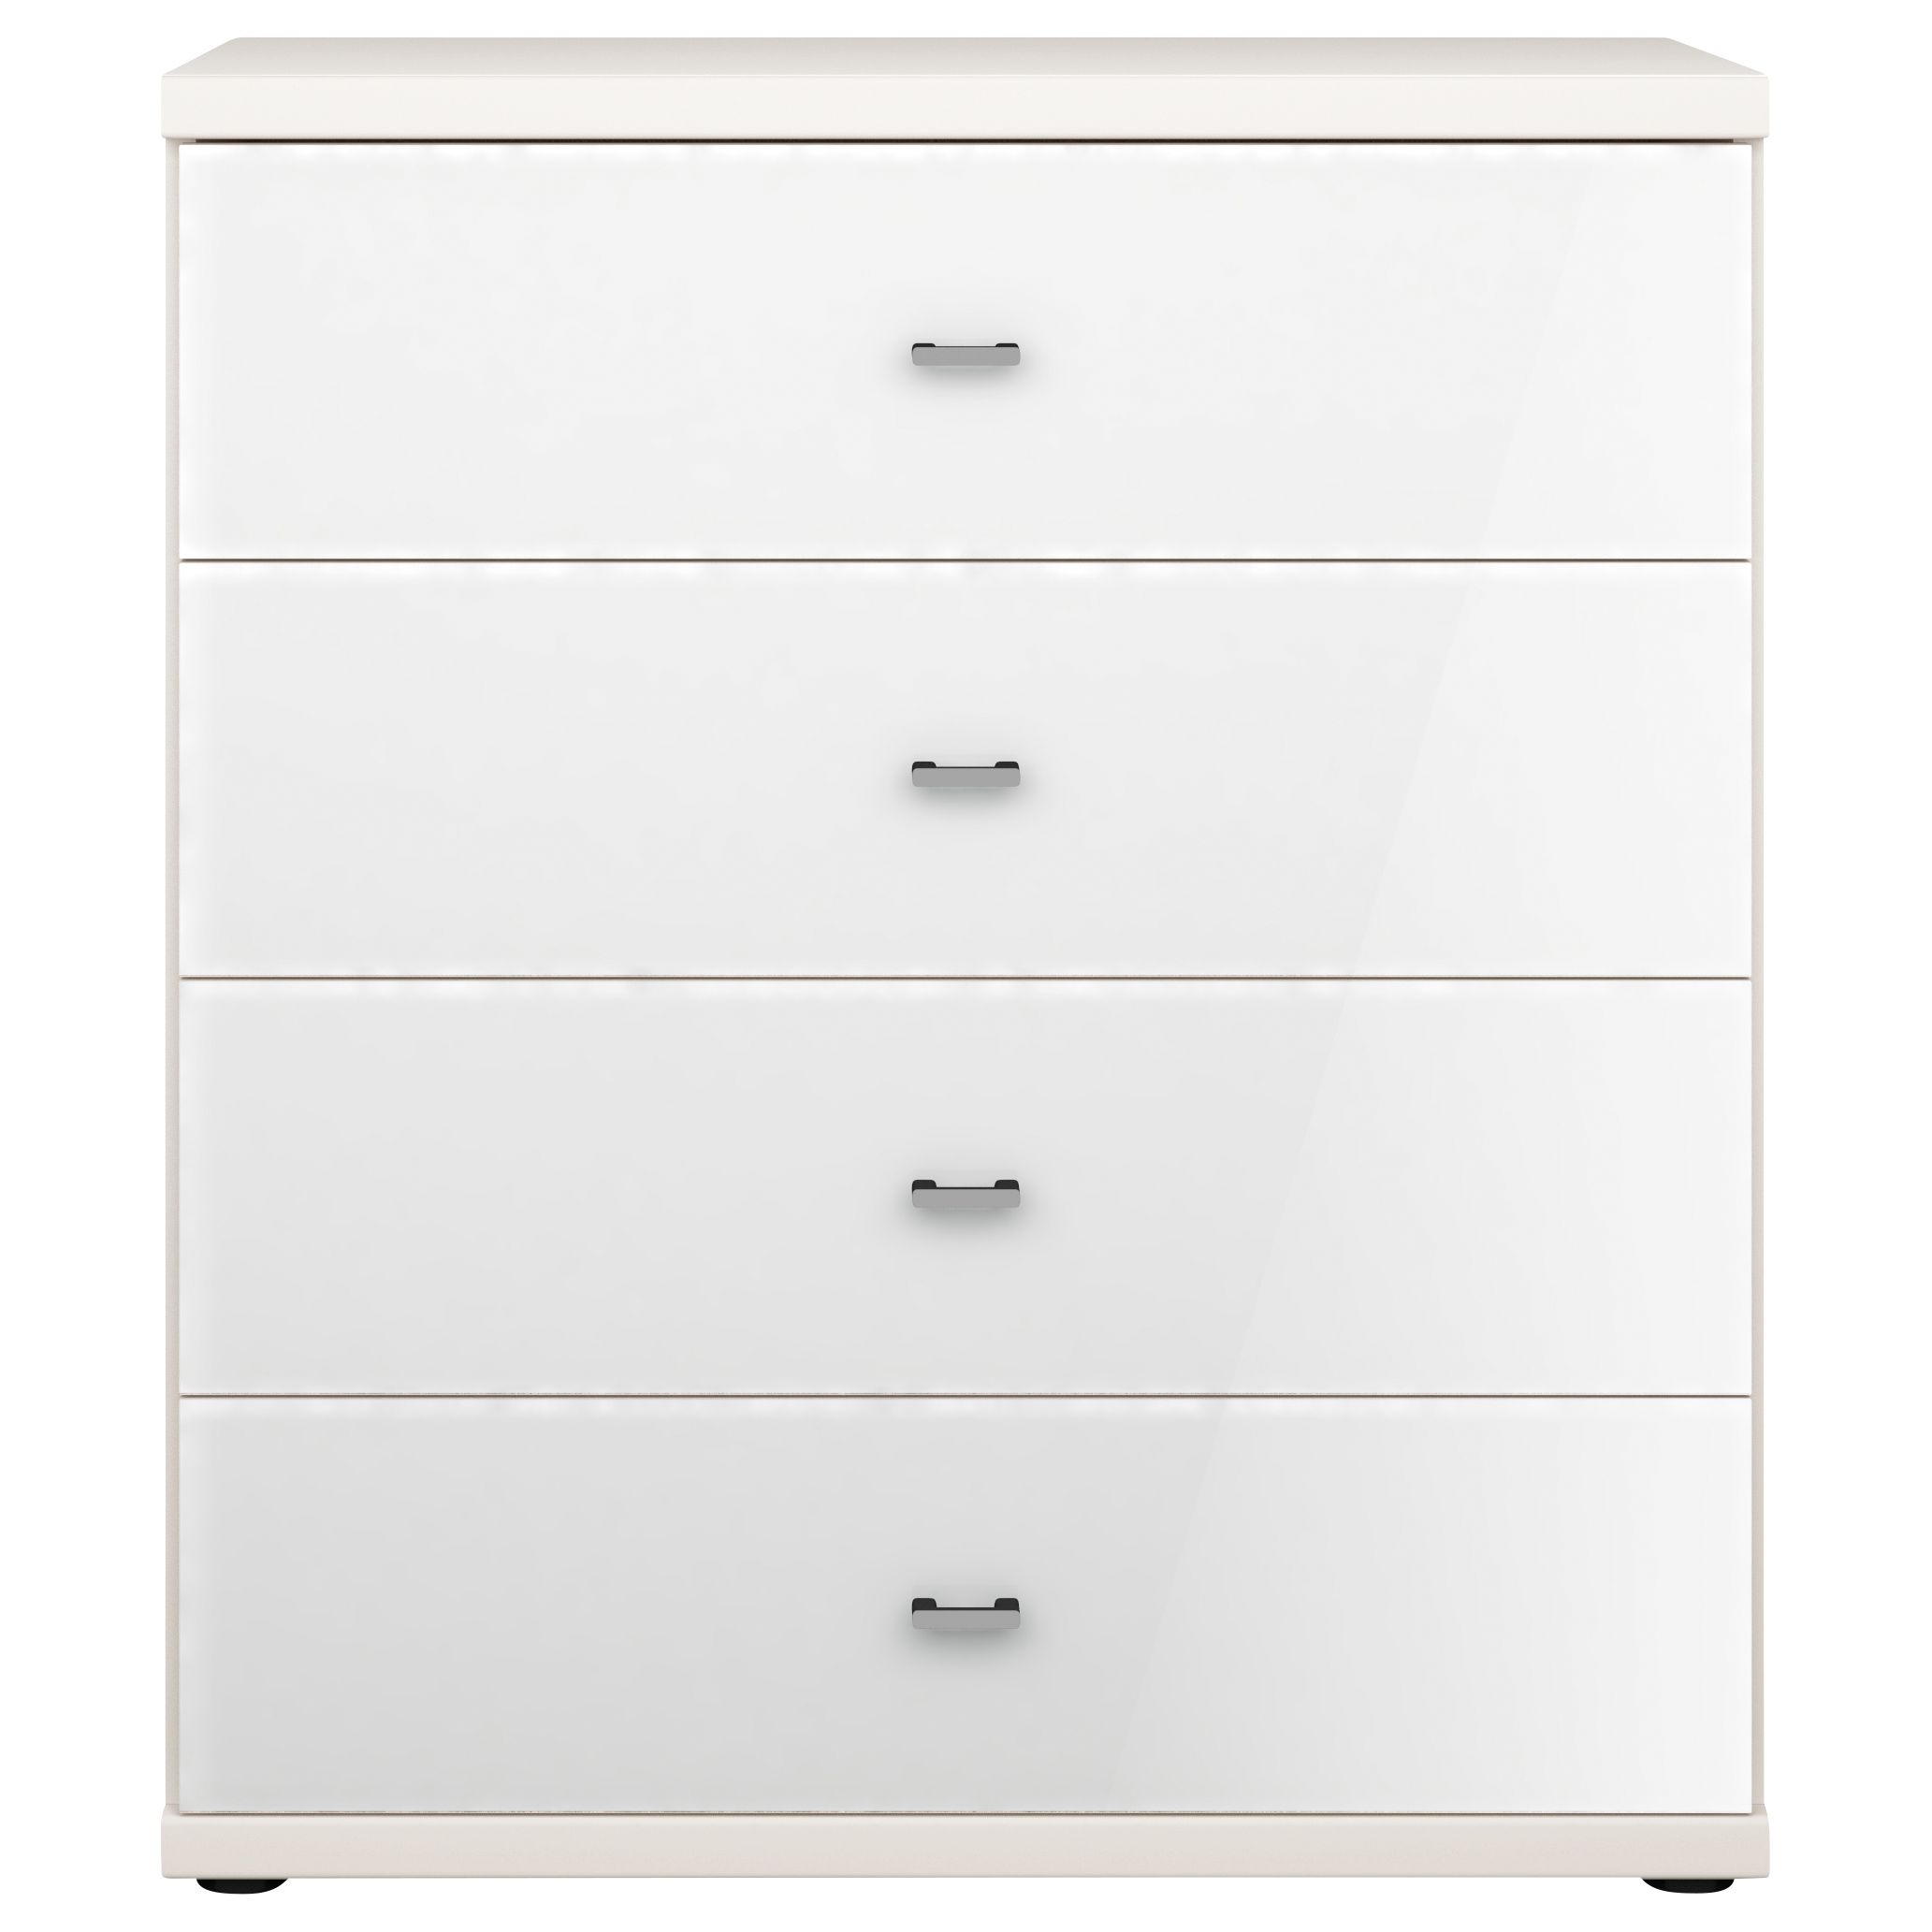 Photo of John lewis elstra wide 4 drawer glass front chest